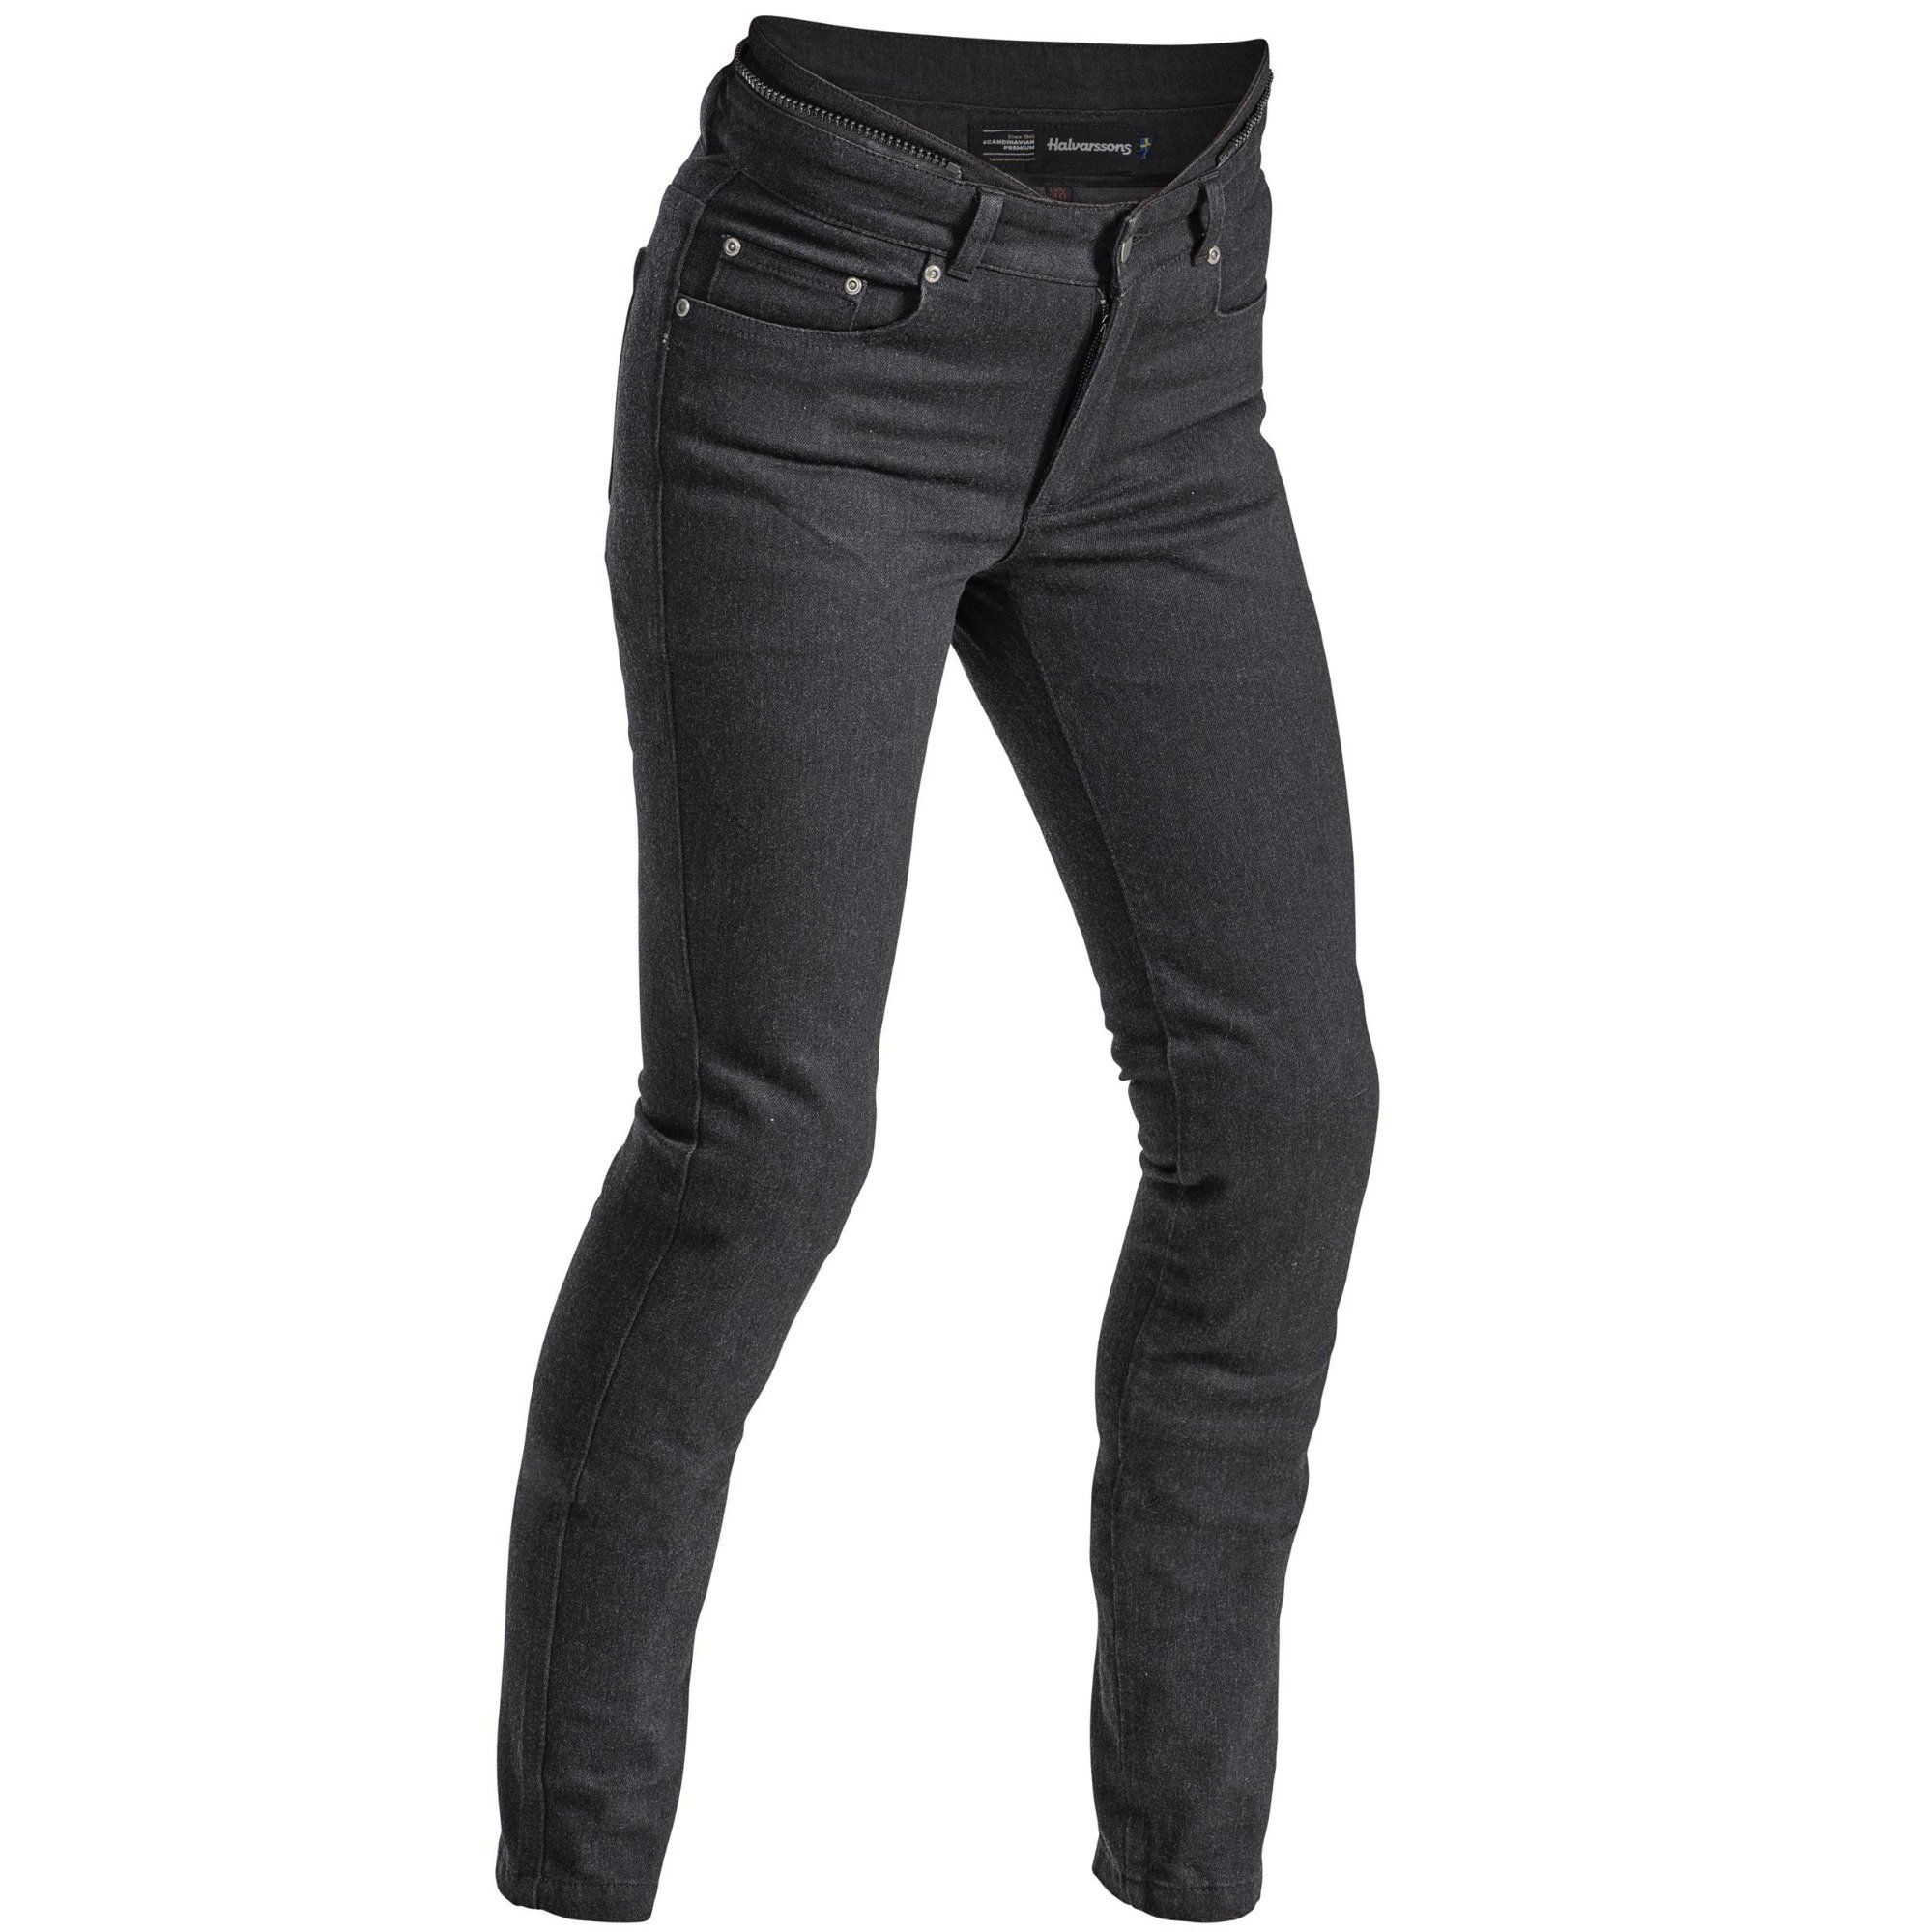 Image of Halvarssons Jeans Nyberg Woman Black Size 44 ID 6438235239324